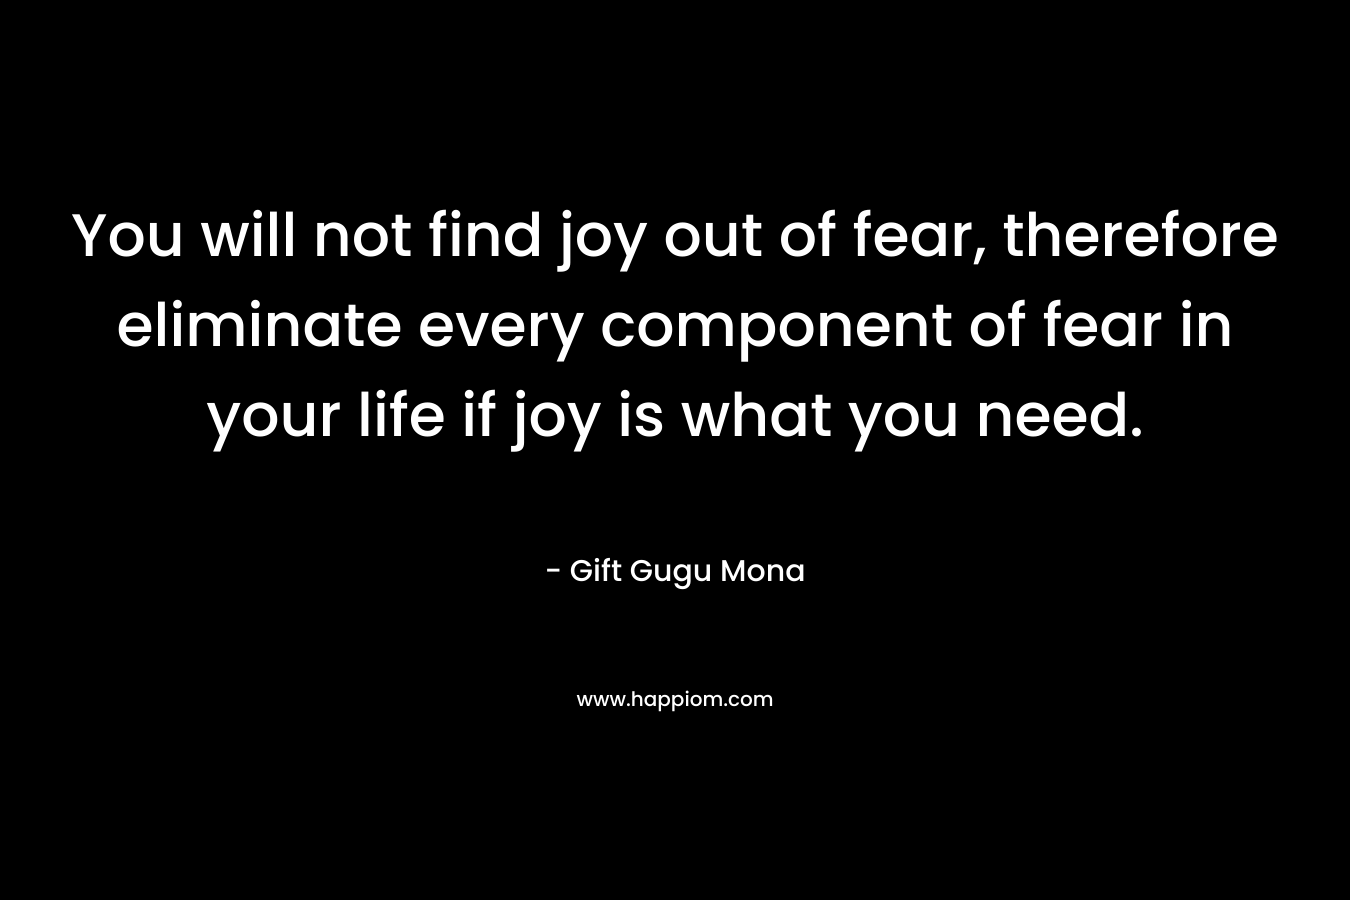 You will not find joy out of fear, therefore eliminate every component of fear in your life if joy is what you need. – Gift Gugu Mona